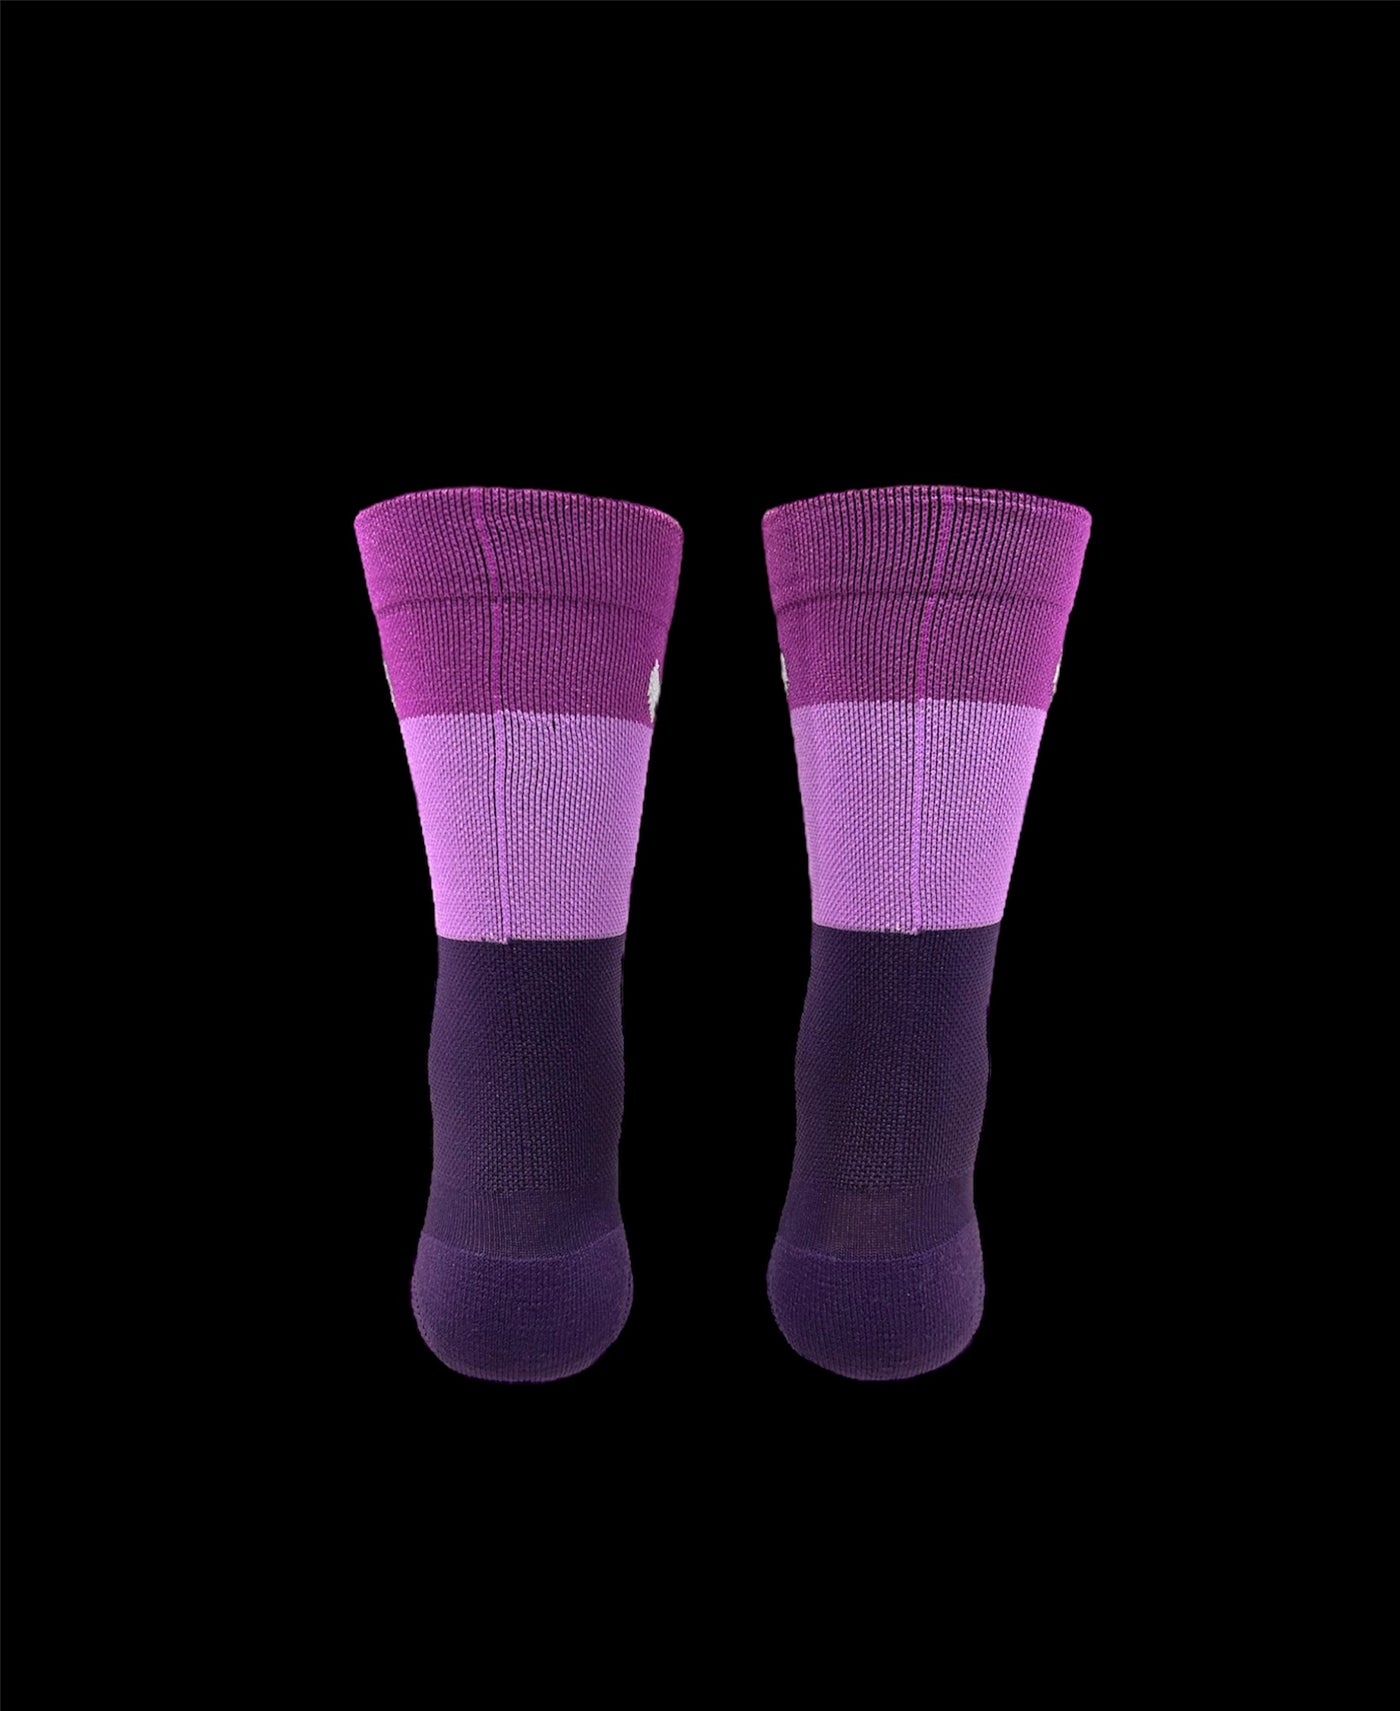 The ”Trio Purple” is a three shades of purple 6" men and women's cycling and running sock with compression.